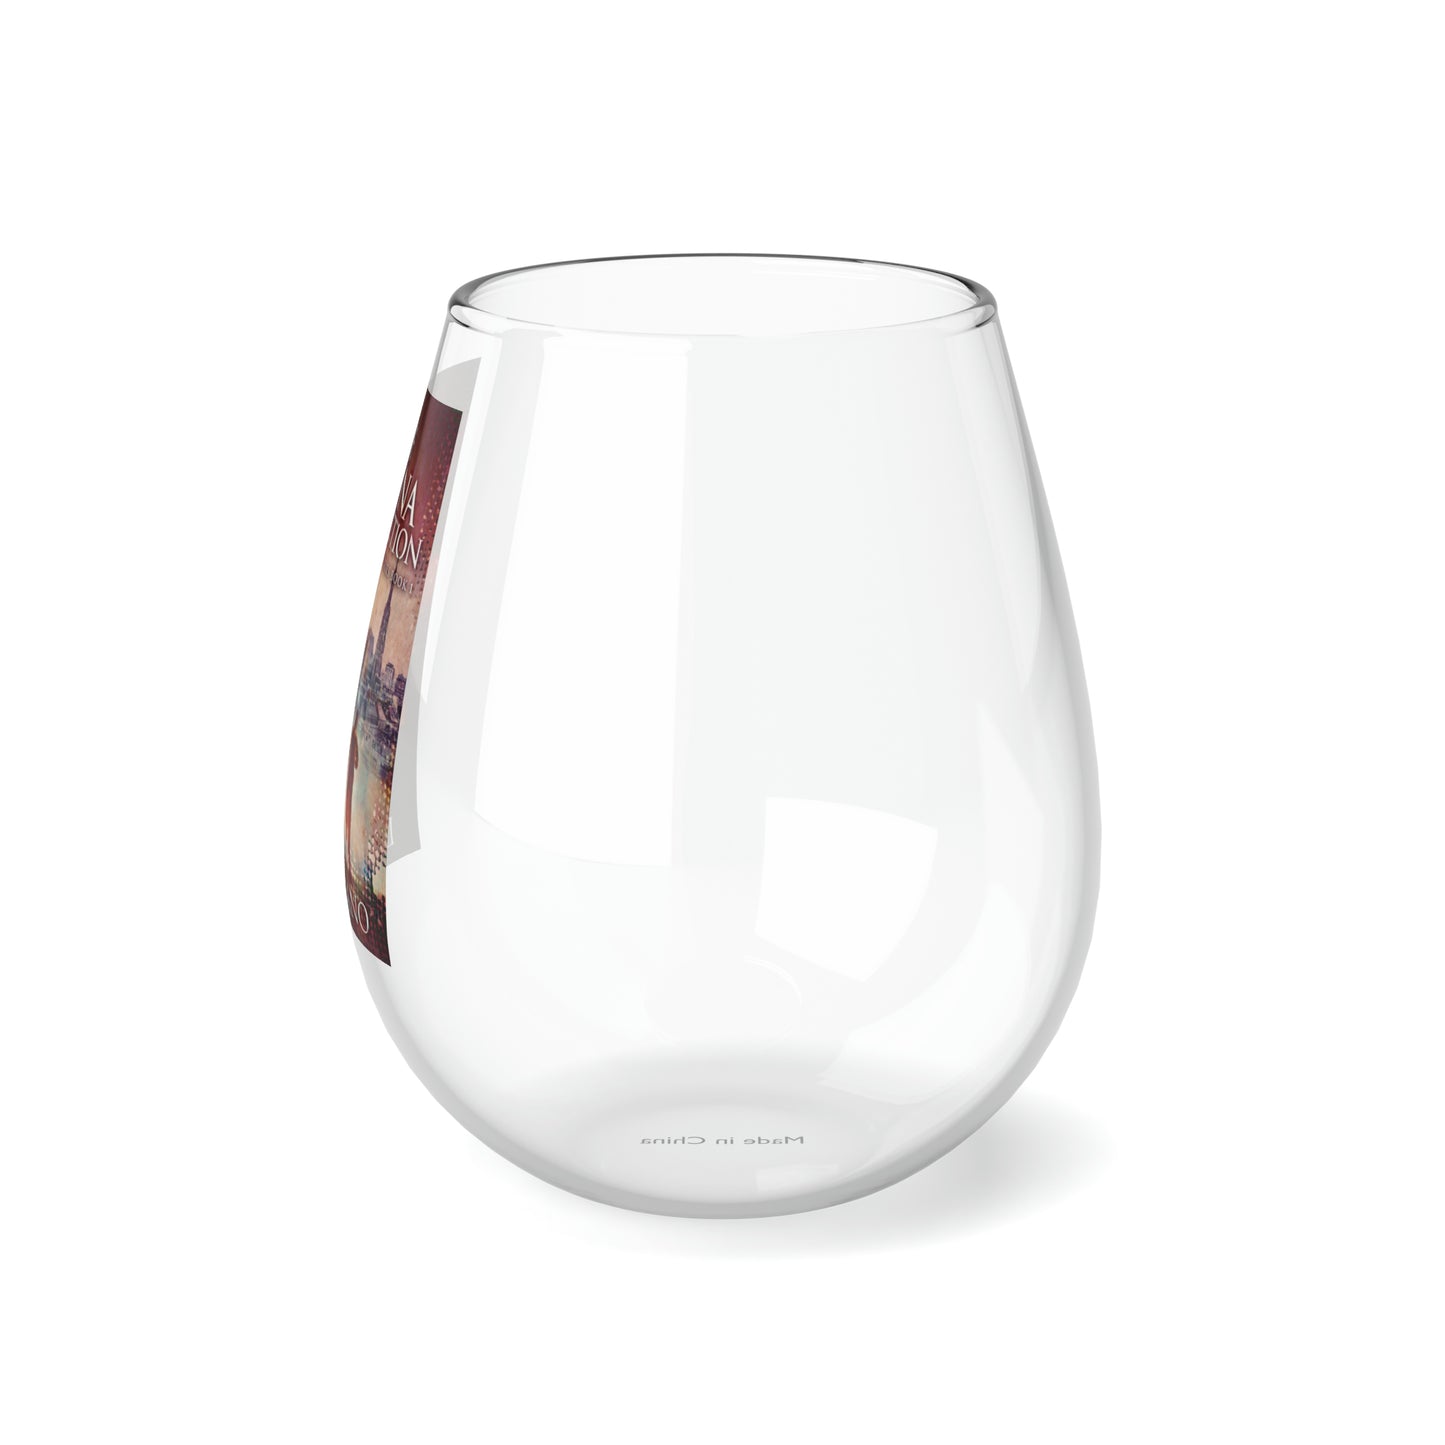 The Vienna Connection - Stemless Wine Glass, 11.75oz